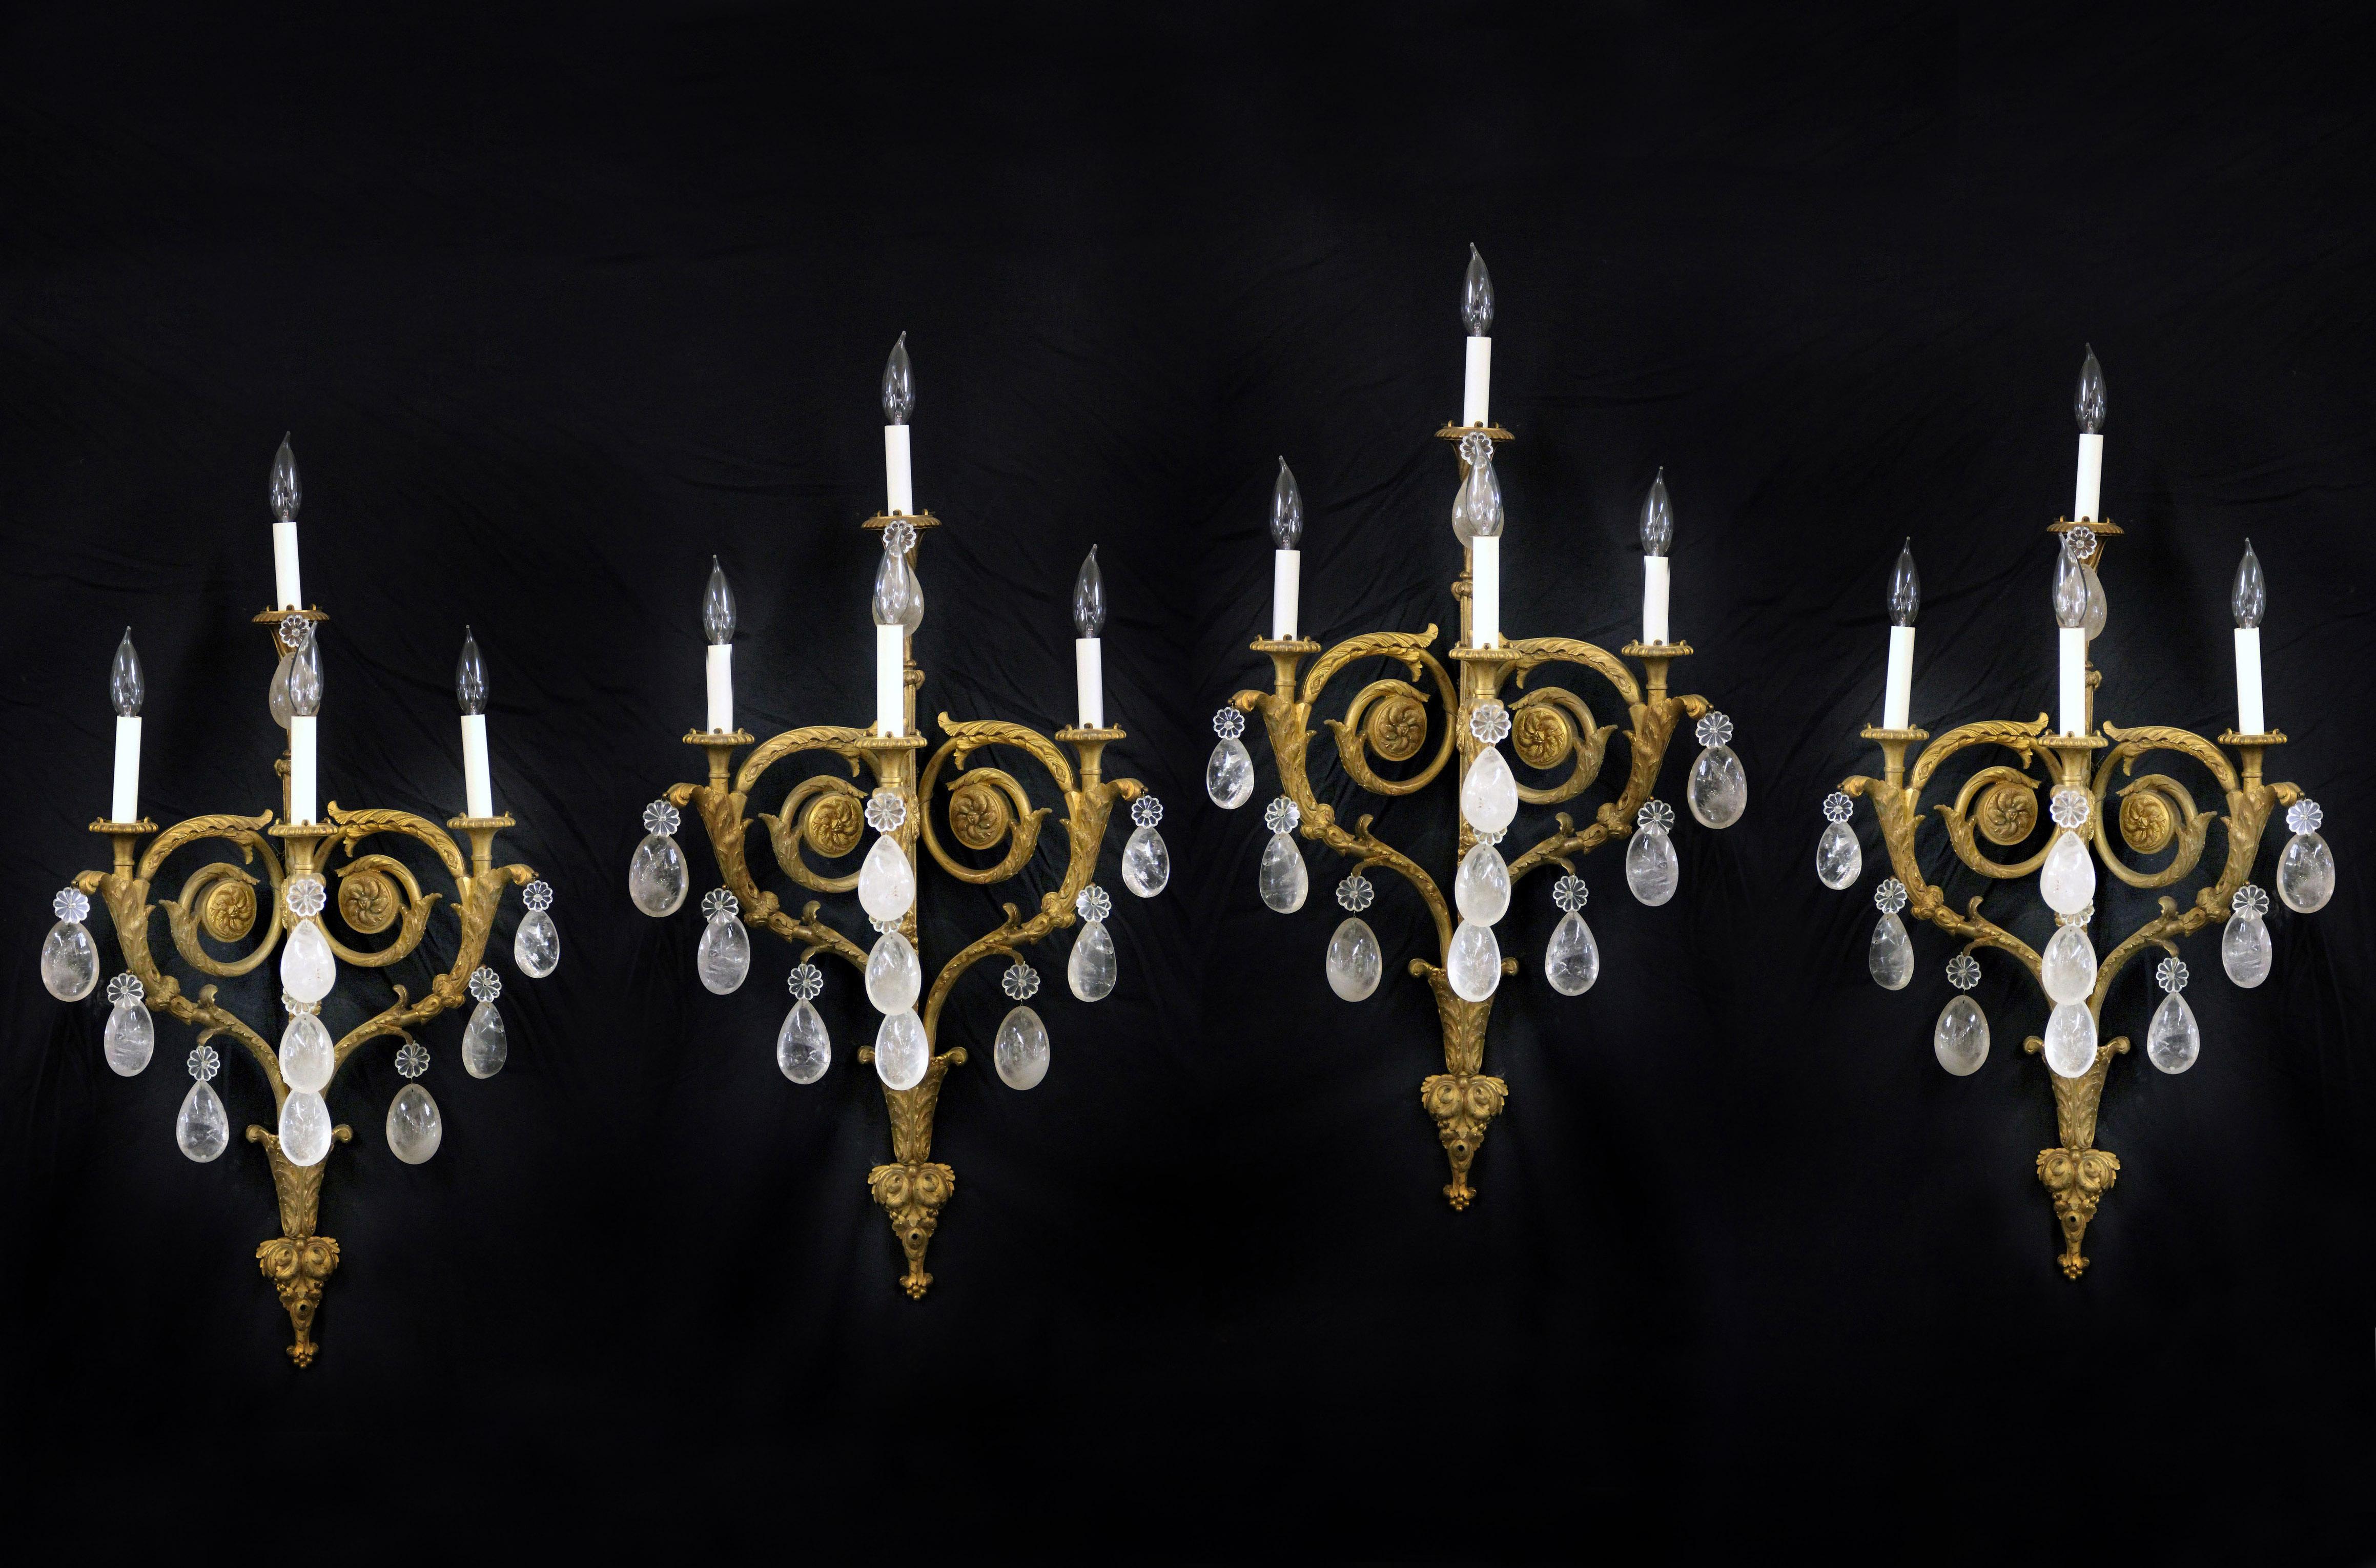 An impressive set of four late 19th century gilt bronze and rock crystal four light sconces

Tear drop shaped crystal, foliate-scrolled arms and backplate, centered by a spiral arm with four tiered lights.